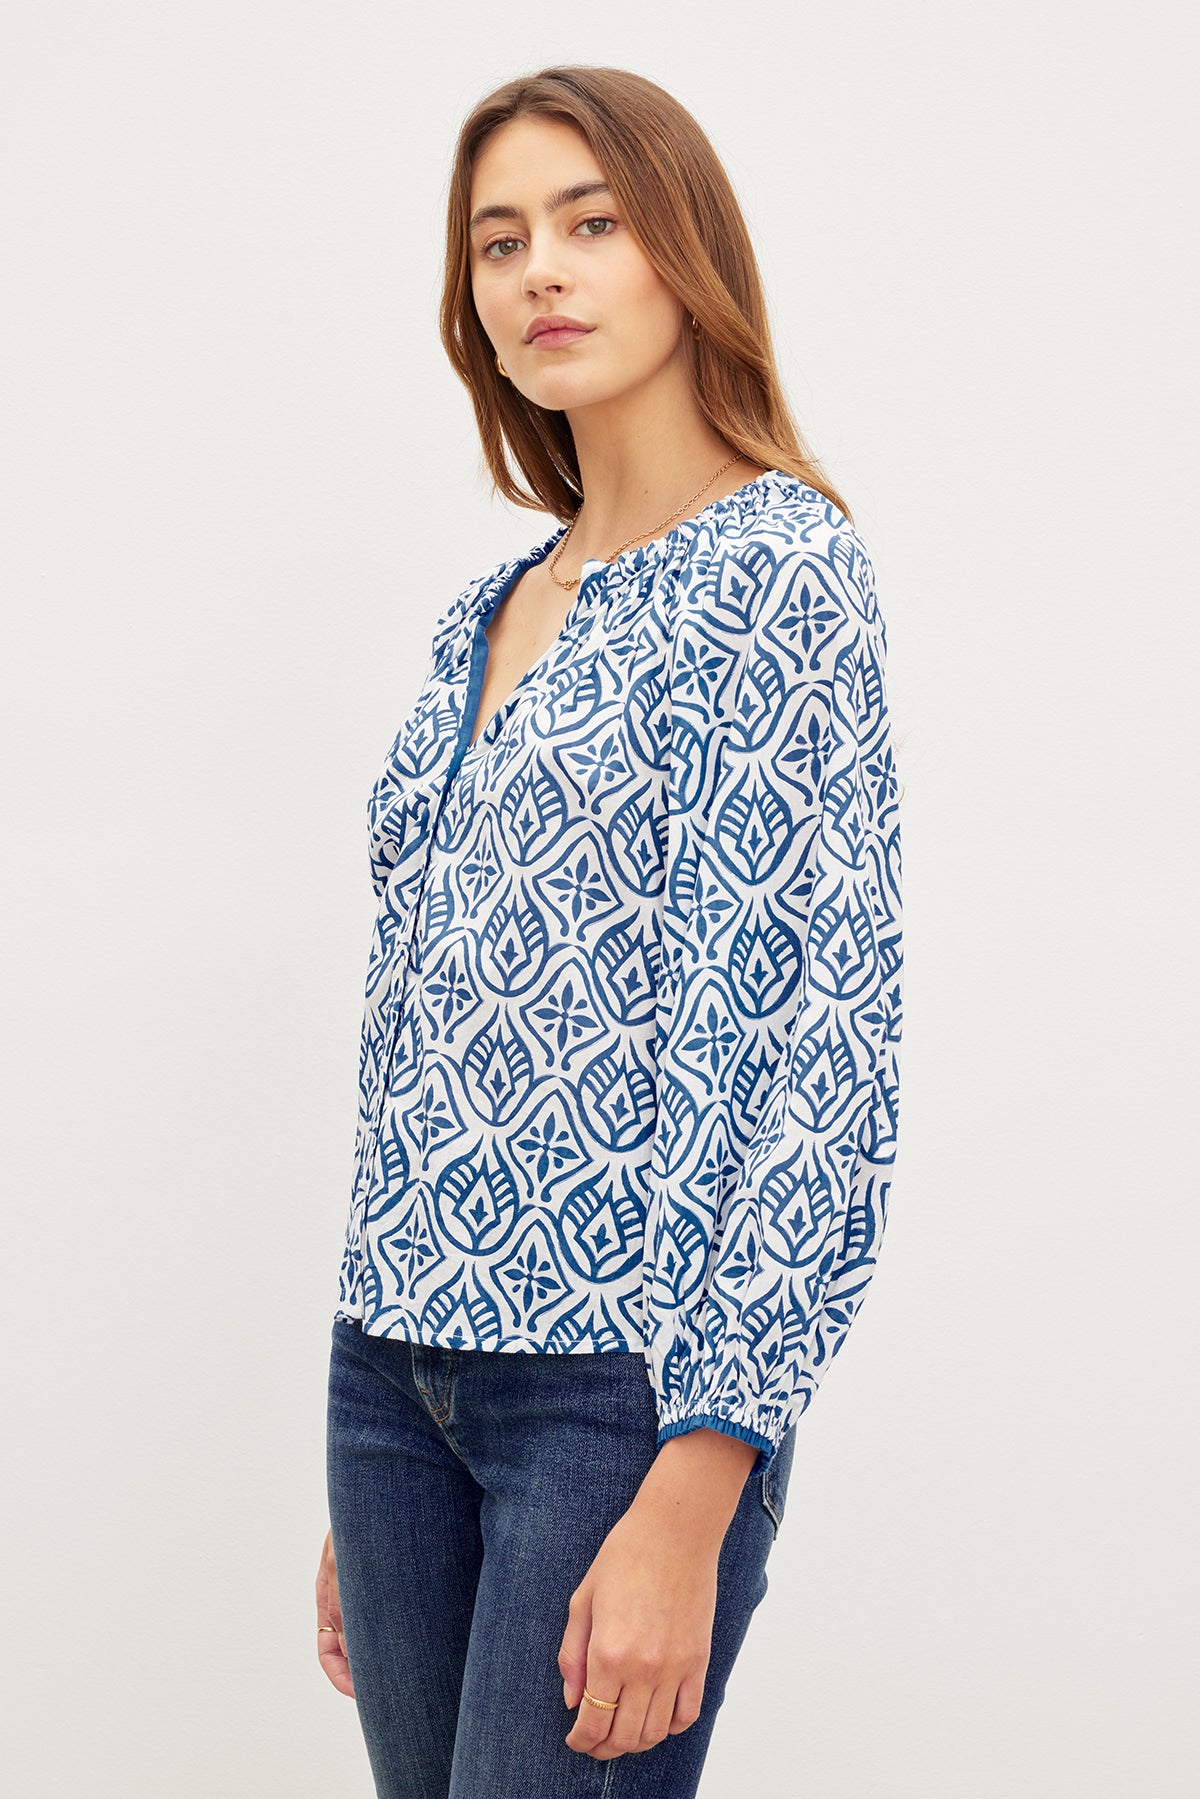 A woman wearing jeans and a MARIAN PRINTED BUTTON FRONT TOP with a v-neckline, by Velvet by Graham & Spencer.-35967584207041